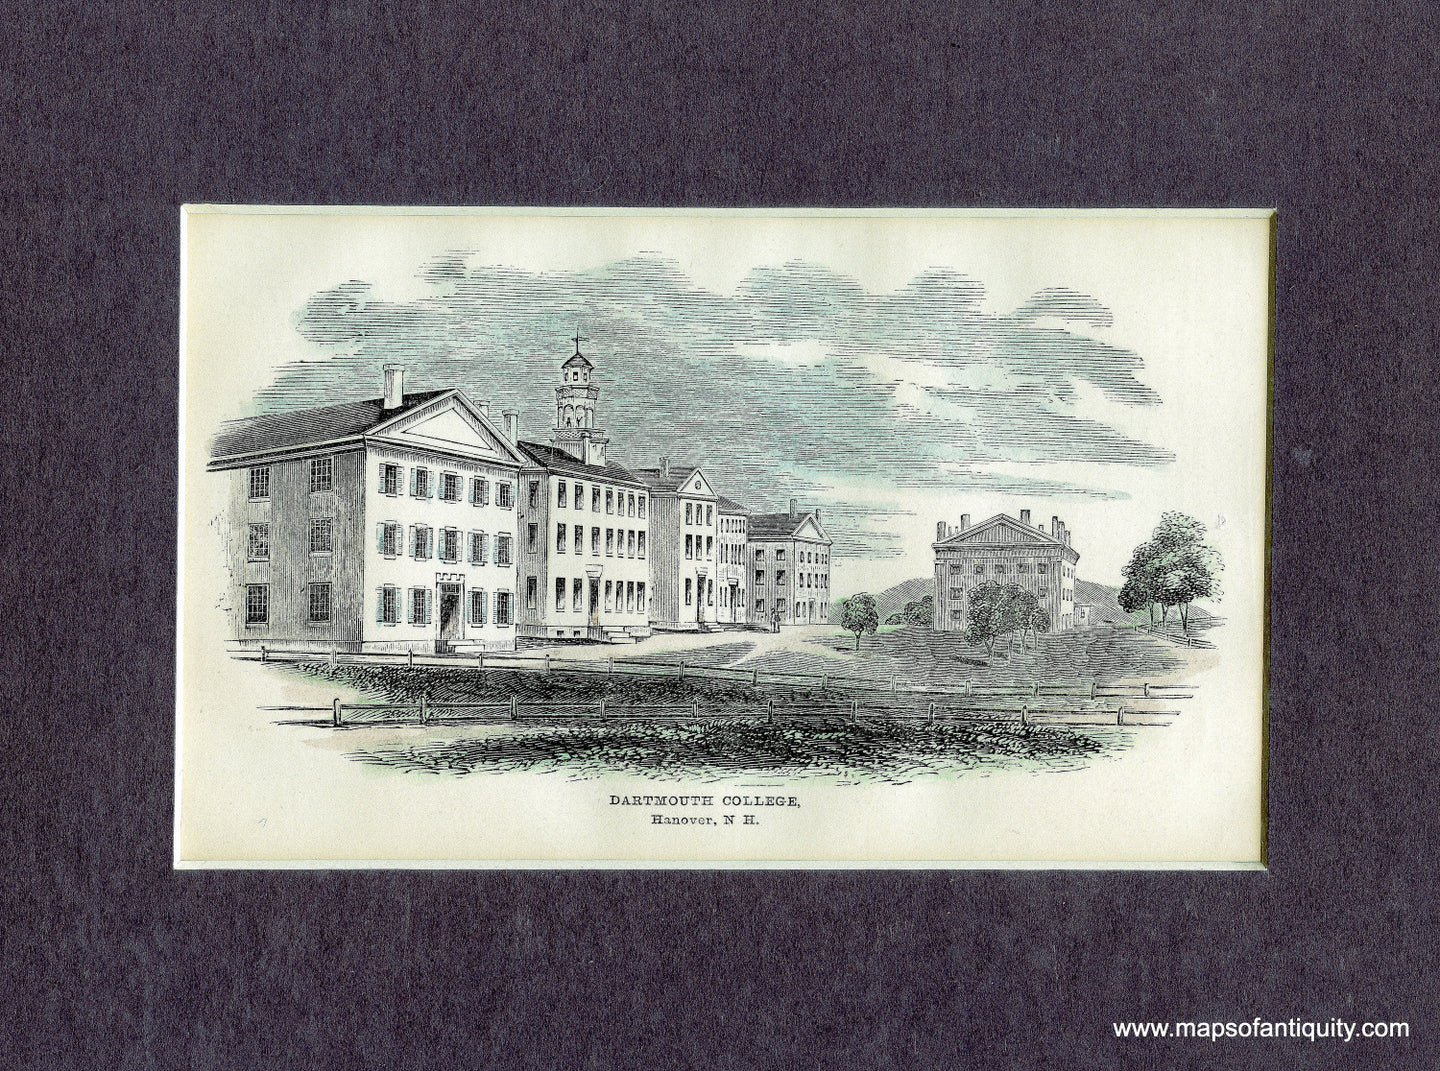 Hand-Colored-Engraved-Illustration-Dartmouth-College-Hanover-N.H.**********-Colleges--1857-Barber-Maps-Of-Antiquity